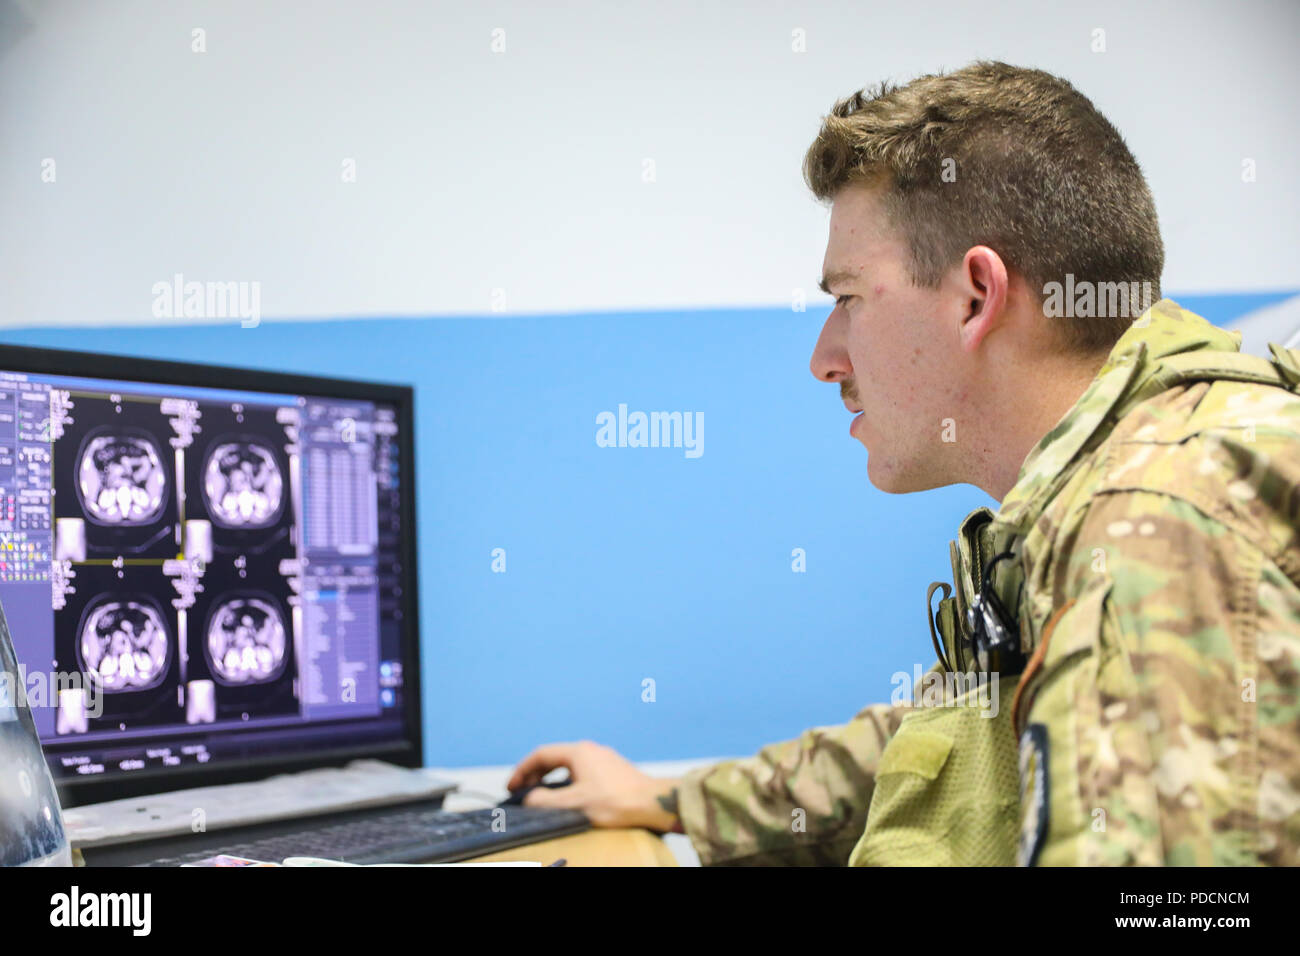 KANDAHAR PROVINCE, Afghanistan (August 5, 2018) -- U.S. Navy Hospital Corpsman 3rd Class Thomas Fite, a radiology technician for Kandahar Airfield NATO Role III Multinational Medical Unit, looks over results of an x-ray, August 5, 2018, to help his Afghan counterparts during a medical advisory visit at Kandahar Regional Military Hospital, Camp Hero in Kandahar, Afghanistan. Staff members from the Role III conduct routine visits to KRMH to train and advise Afghan medical staff. (U.S. Army photo by Staff Sgt. Neysa Canfield/TAAC-South Public Affairs) Stock Photo